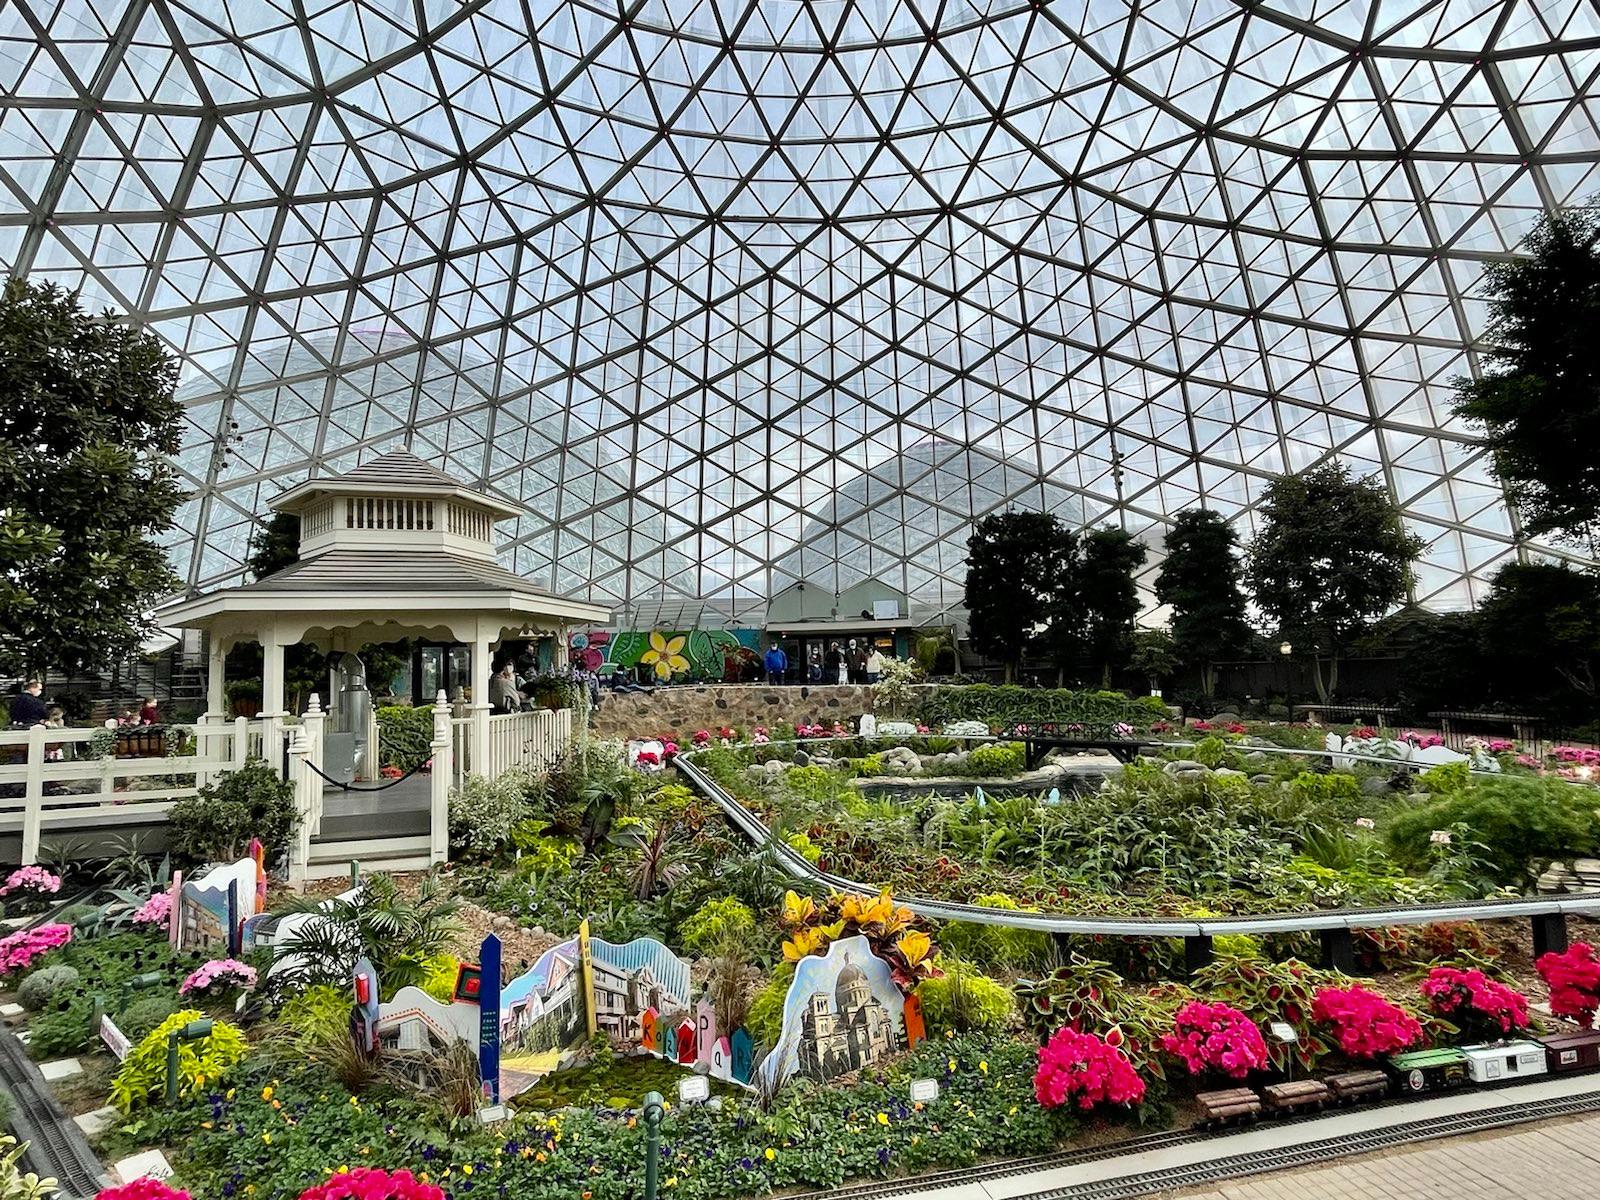 A view of the garden dome with two domes in the distance.